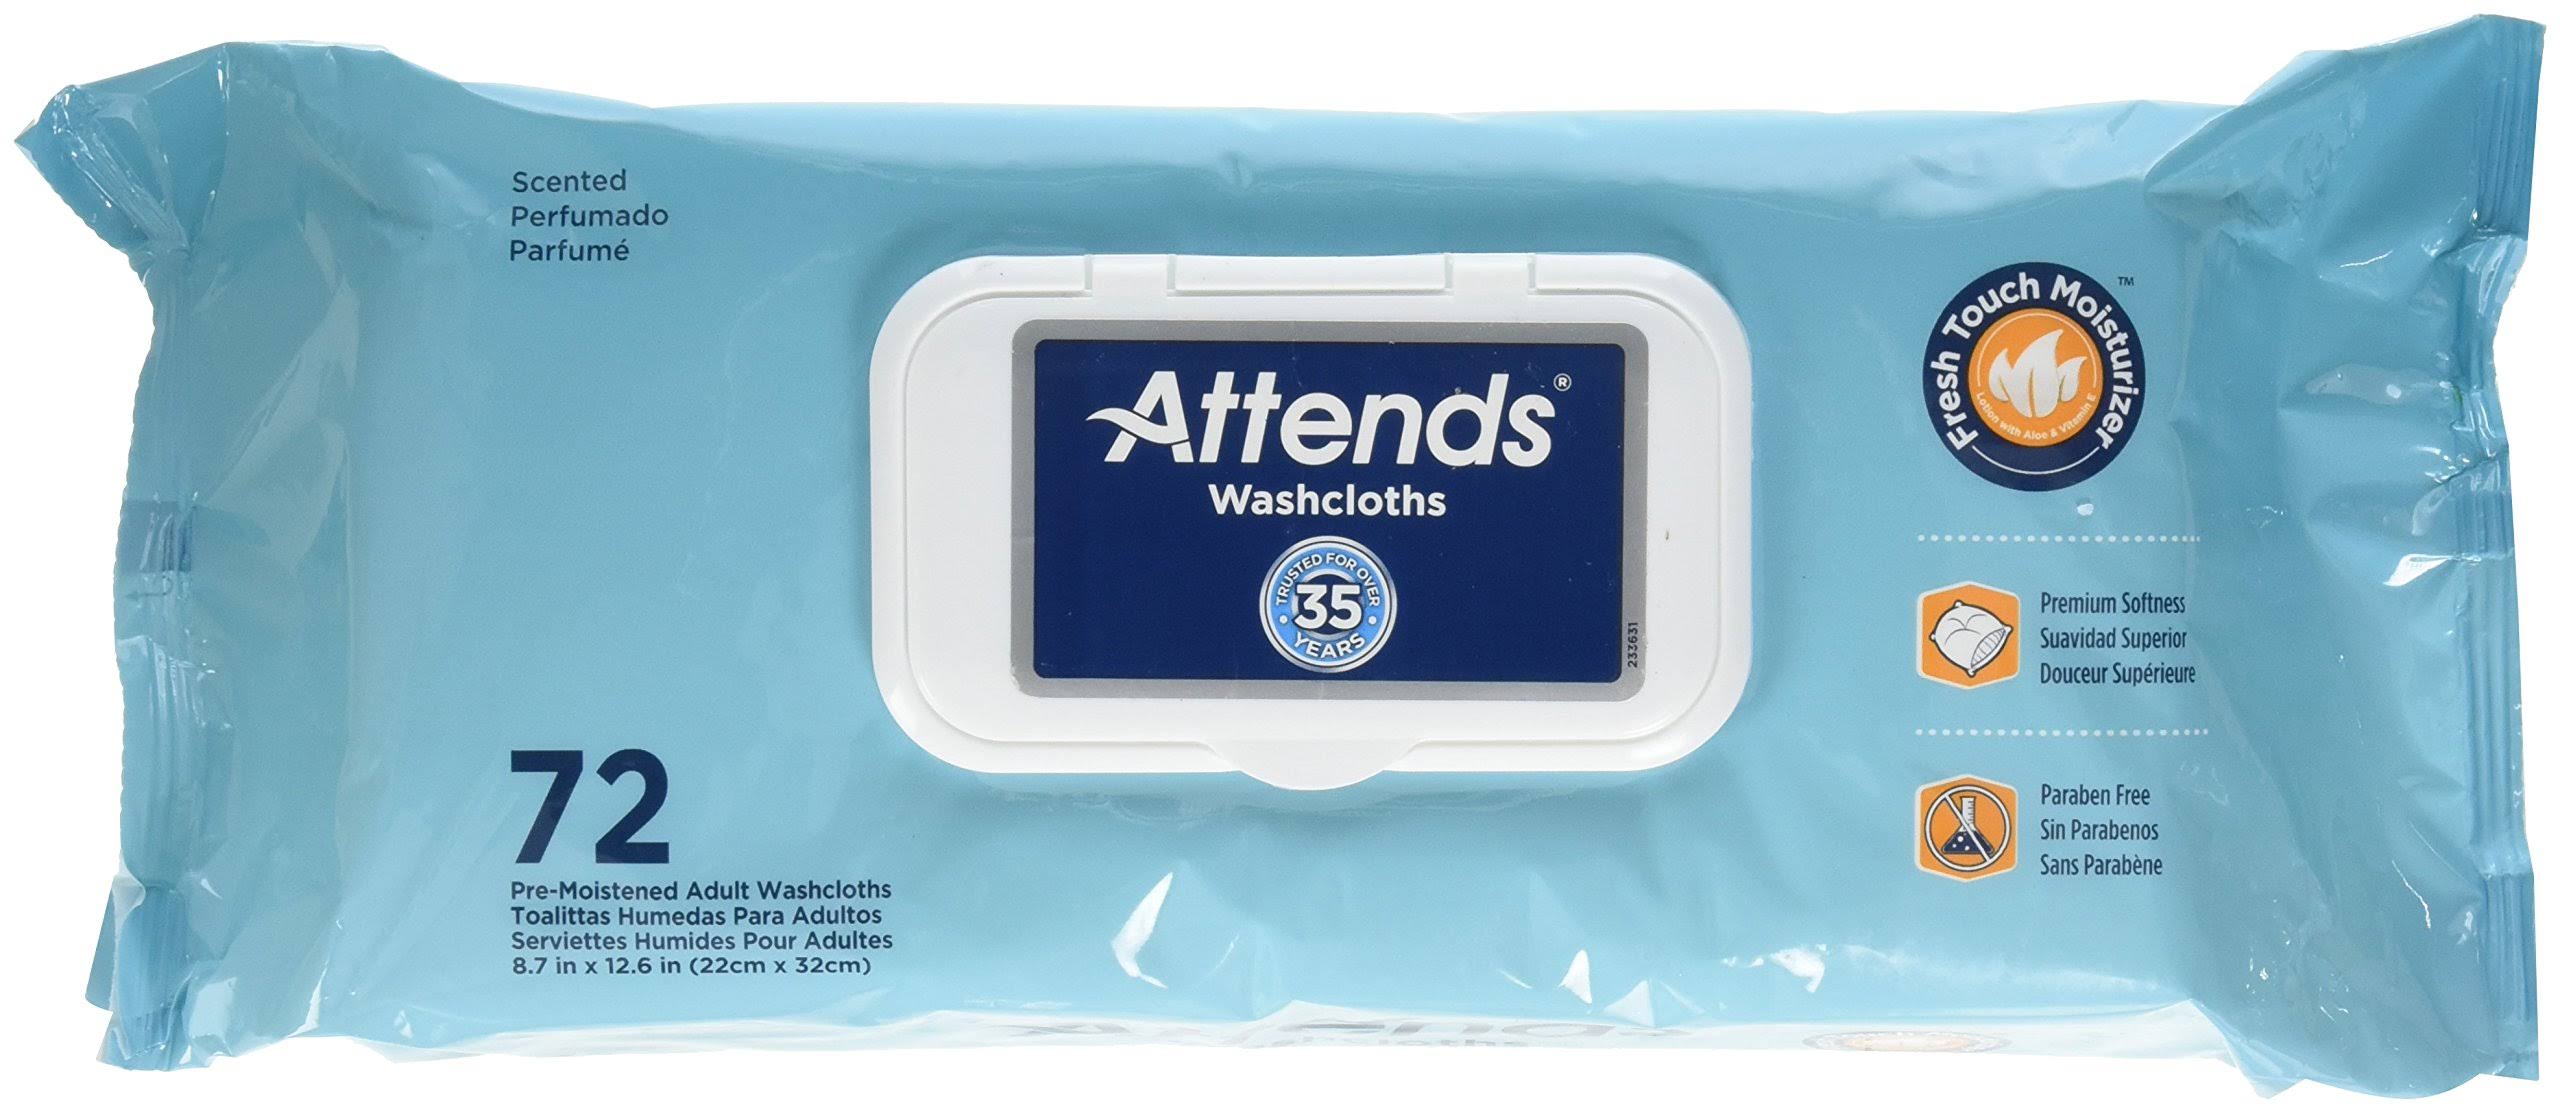 Attends Washcloths Wipes - 72 Wipes